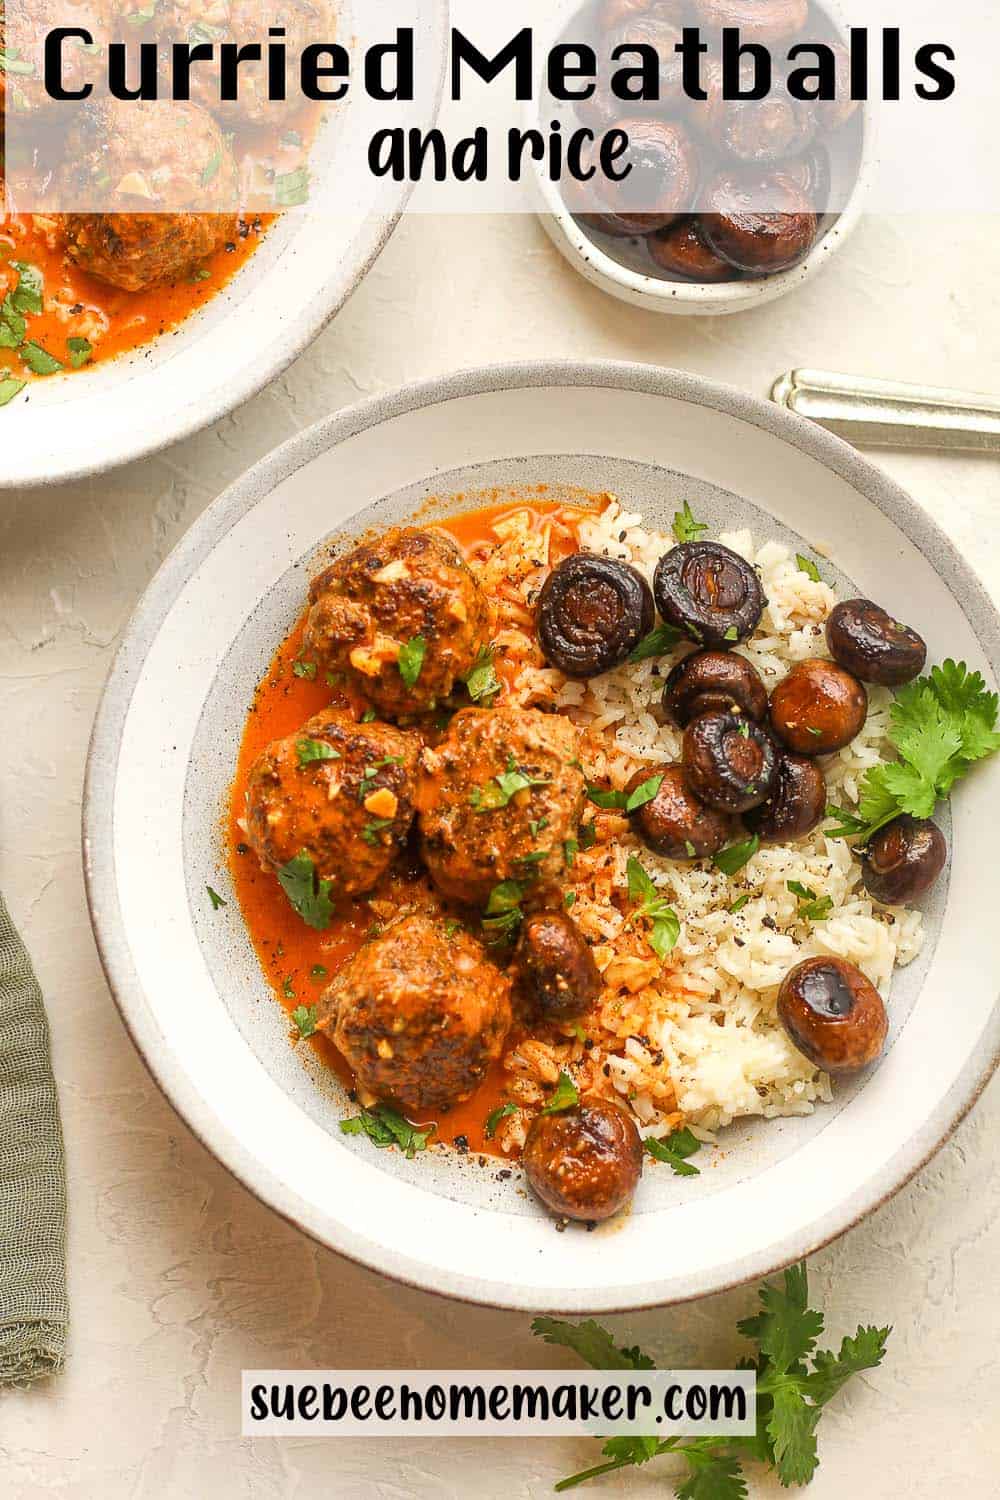 Two bowls of curried meatballs and rice.